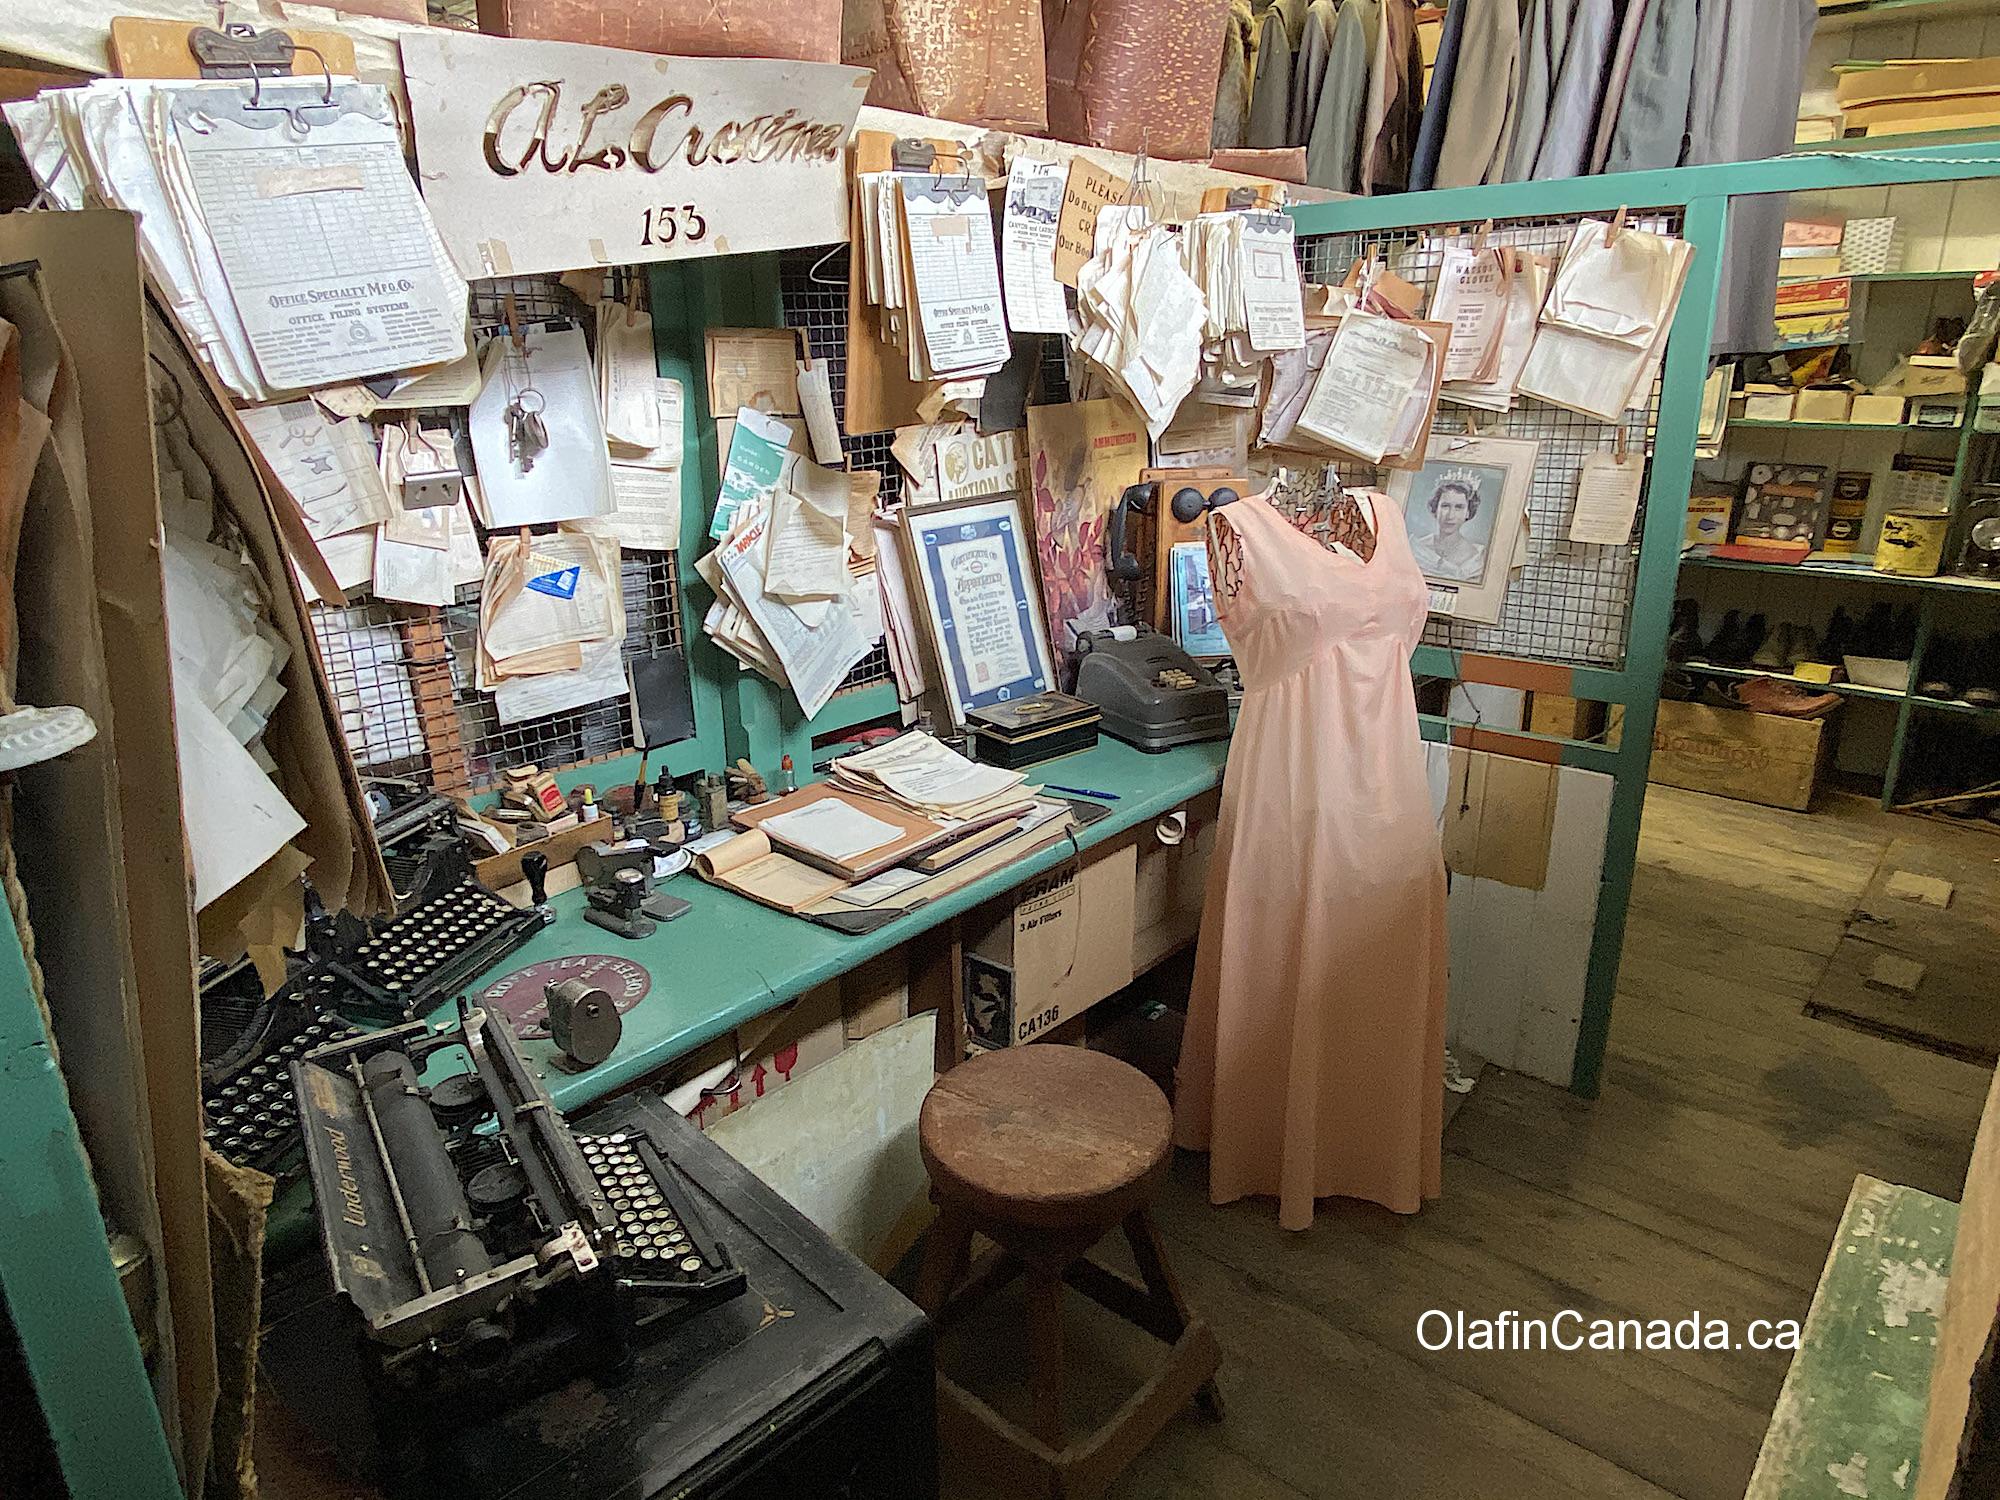 Office desk at the General Store in 153 Mile House #olafincanada #britishcolumbia #discoverbc #abandonedbc #153milehouse #generalstore #backintime